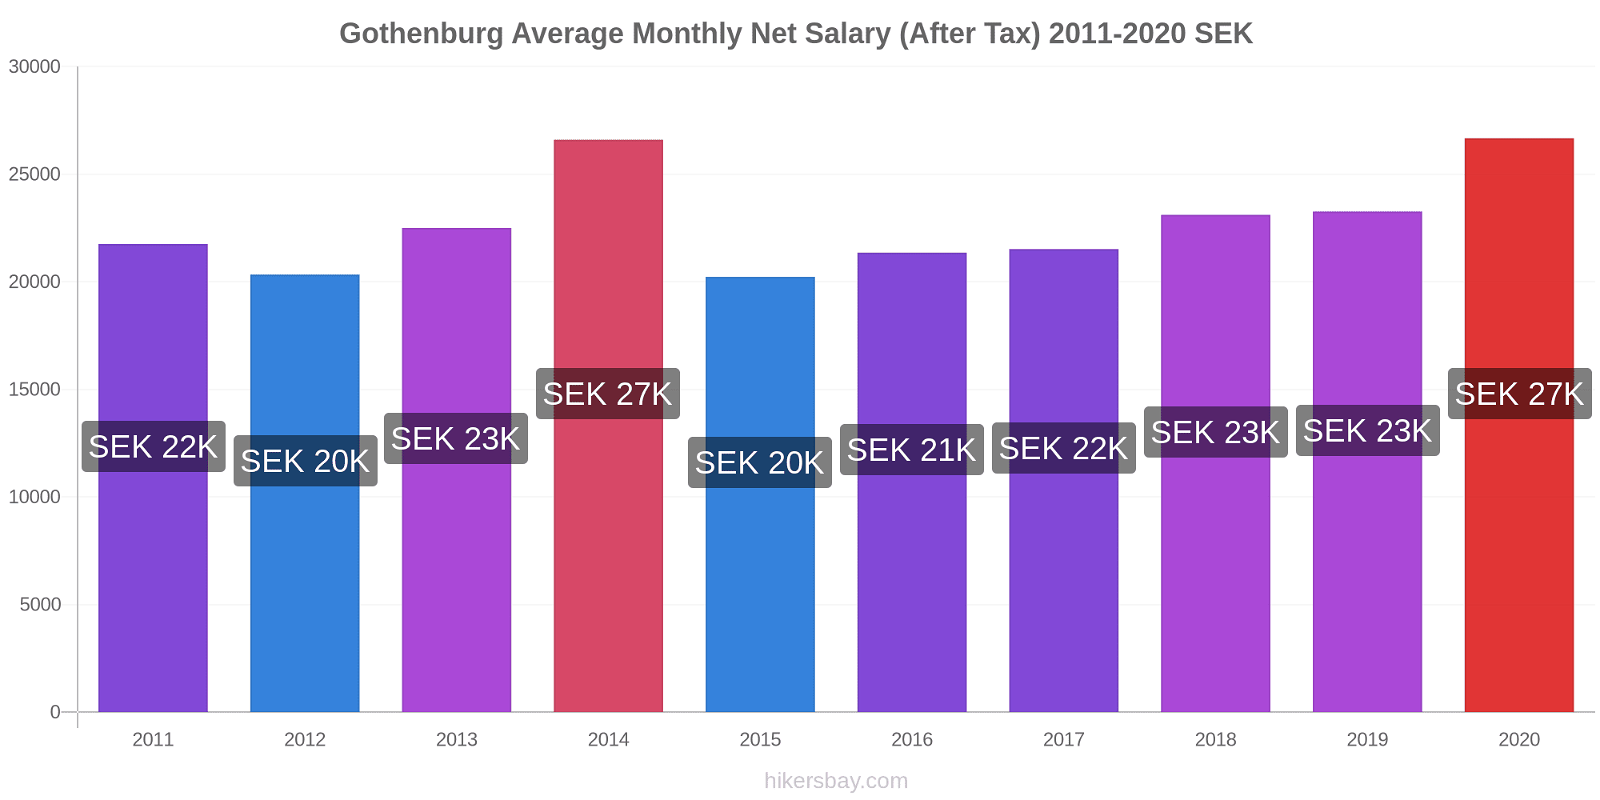 Gothenburg price changes Average Monthly Net Salary (After Tax) hikersbay.com